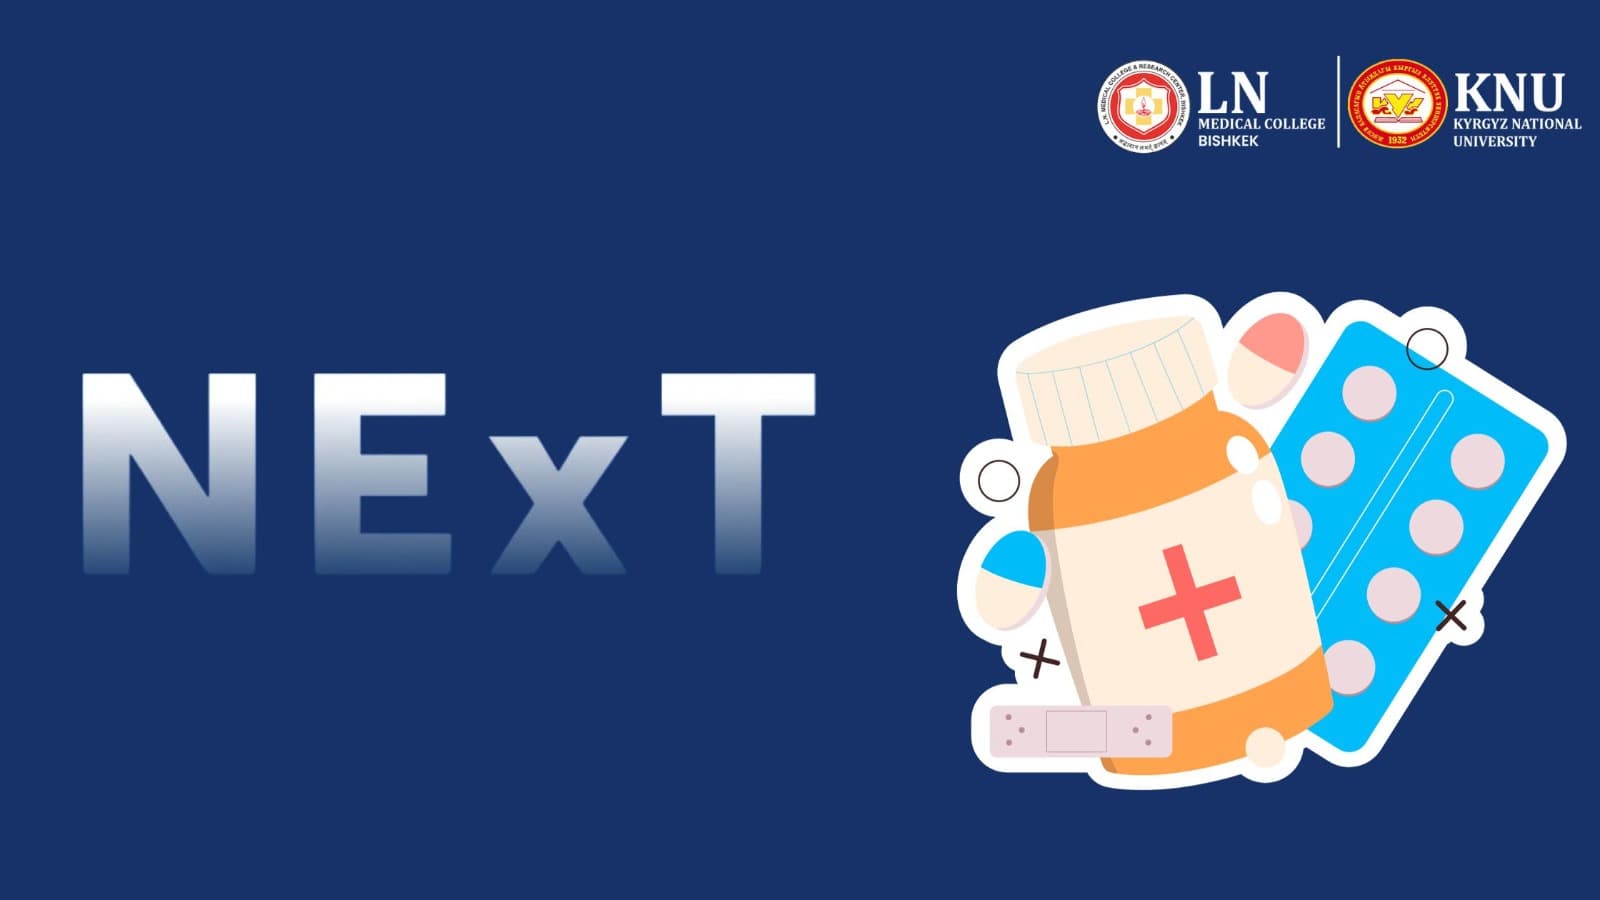 What Is NExT Exam? - Blog - LN Medical Collage